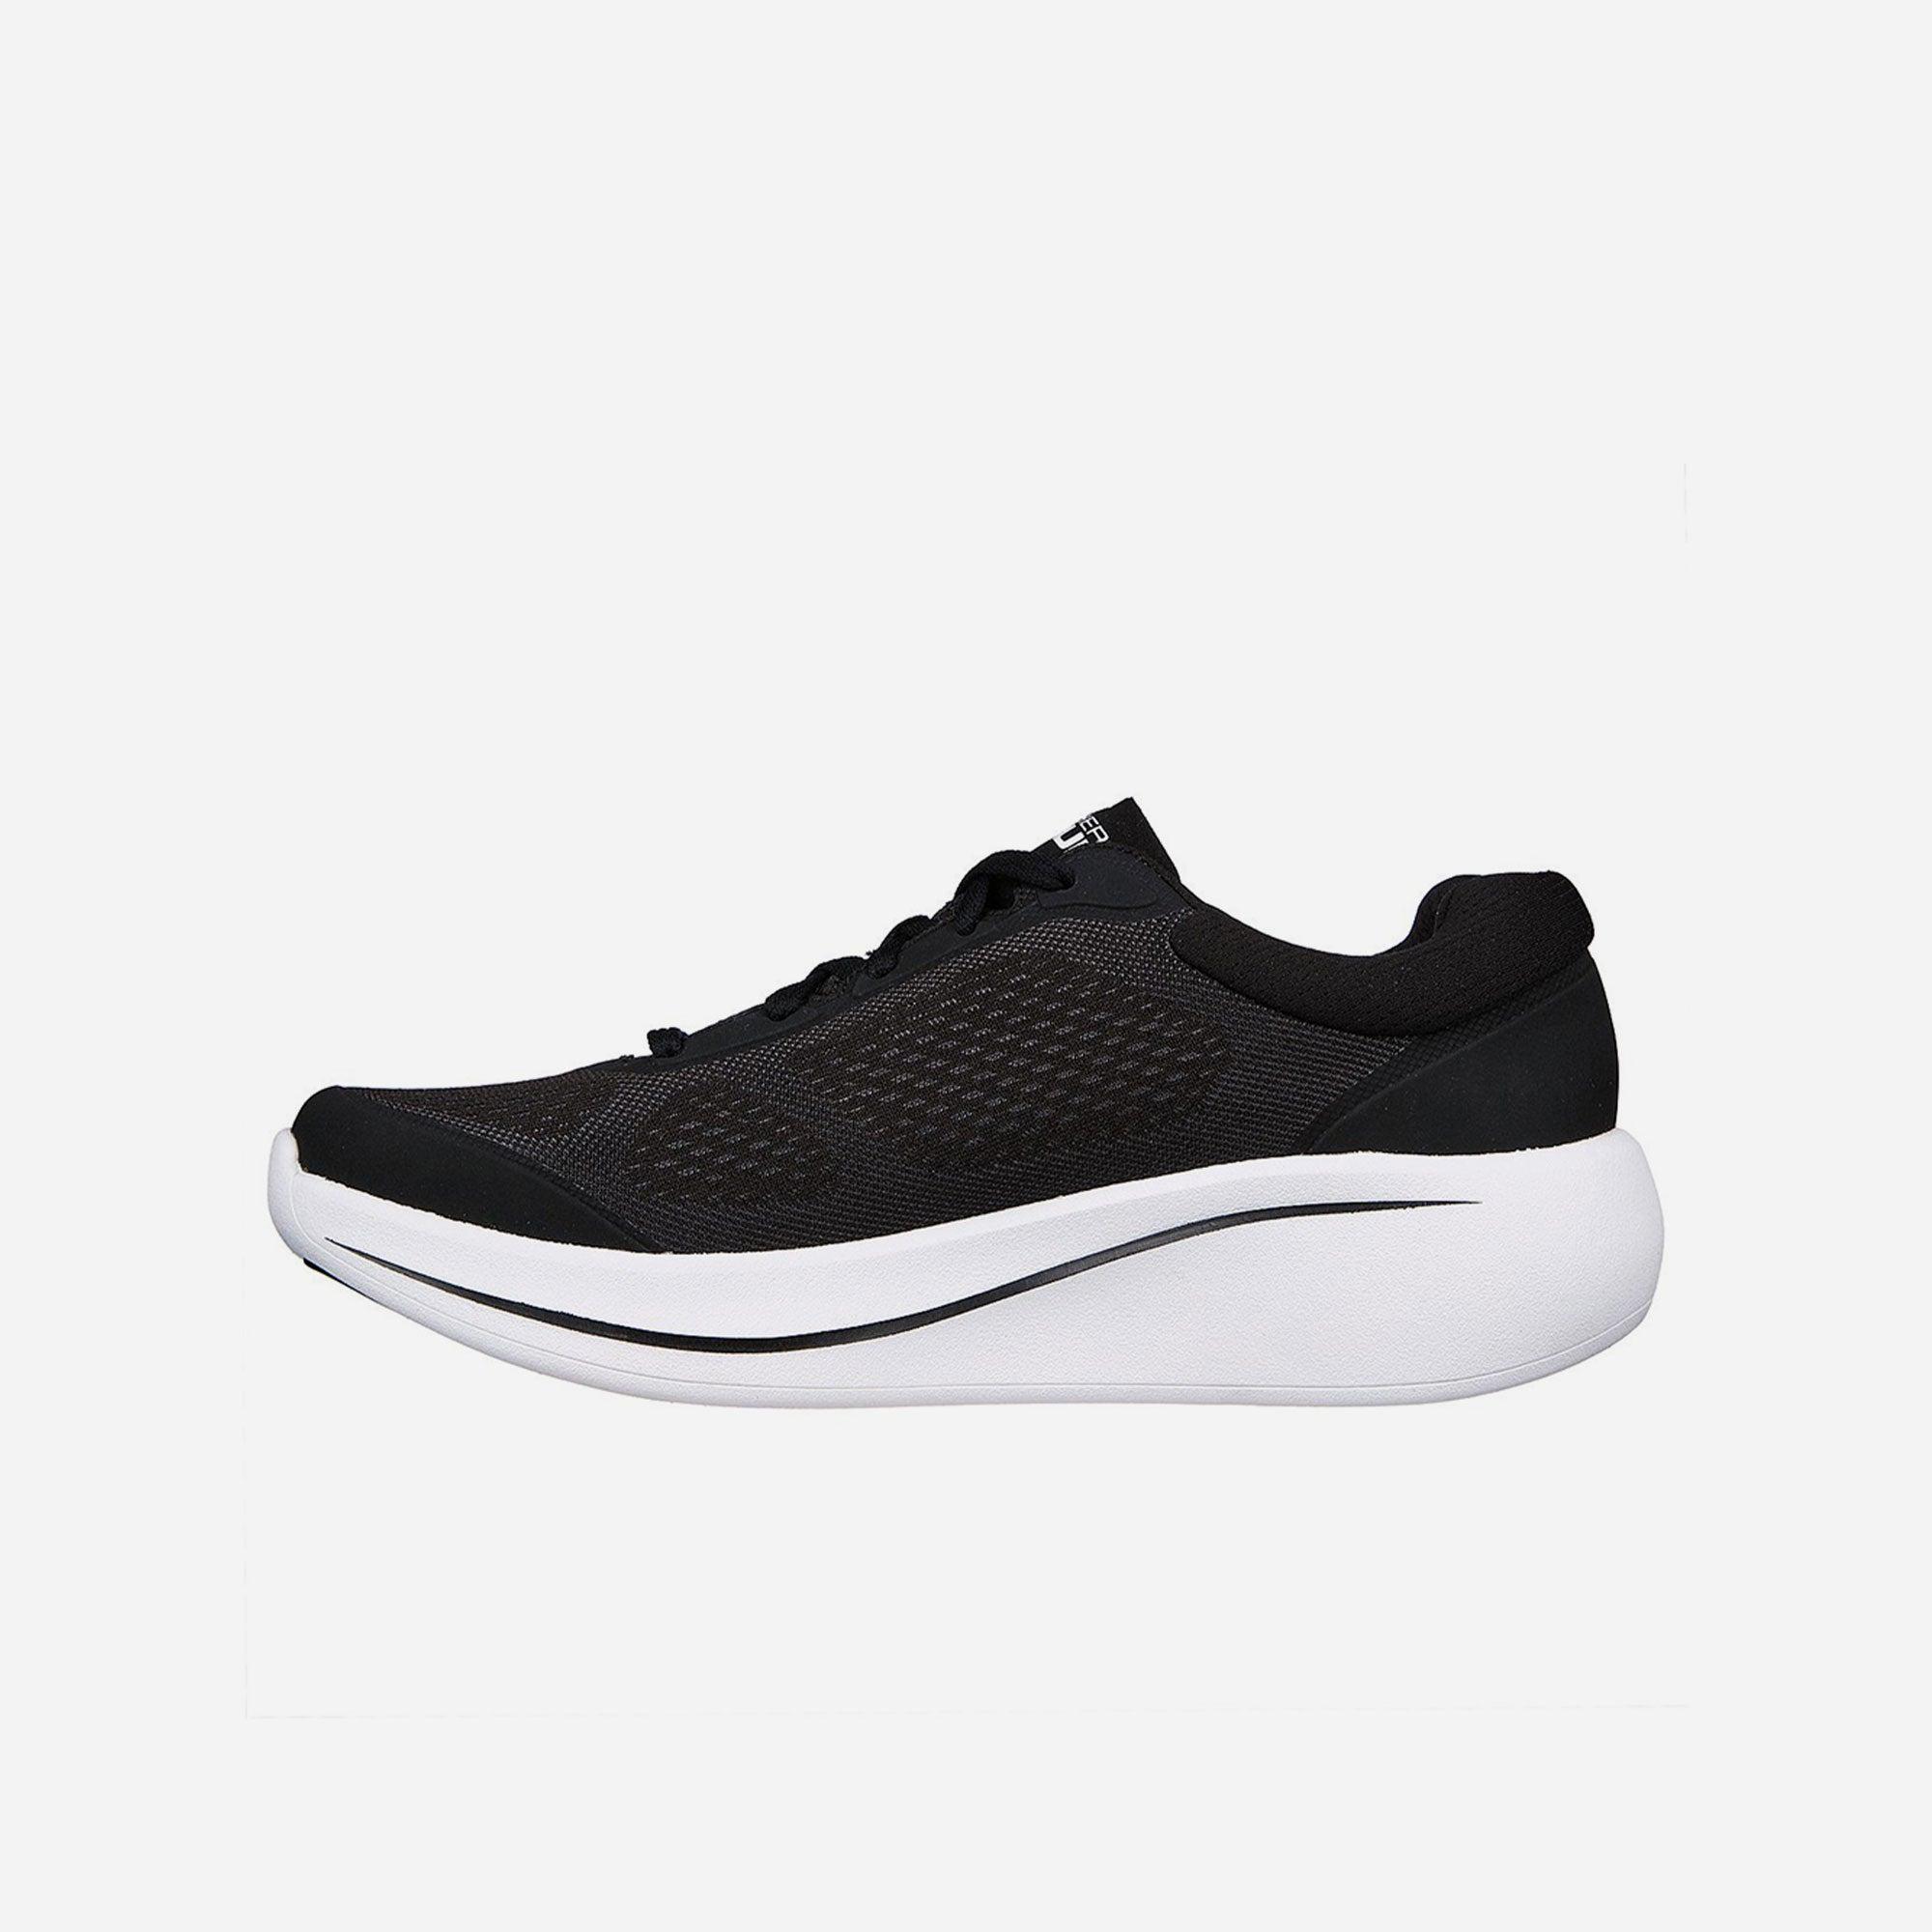 Giày thể thao nam Skechers Max Cushioning Essential - 220723-BKW